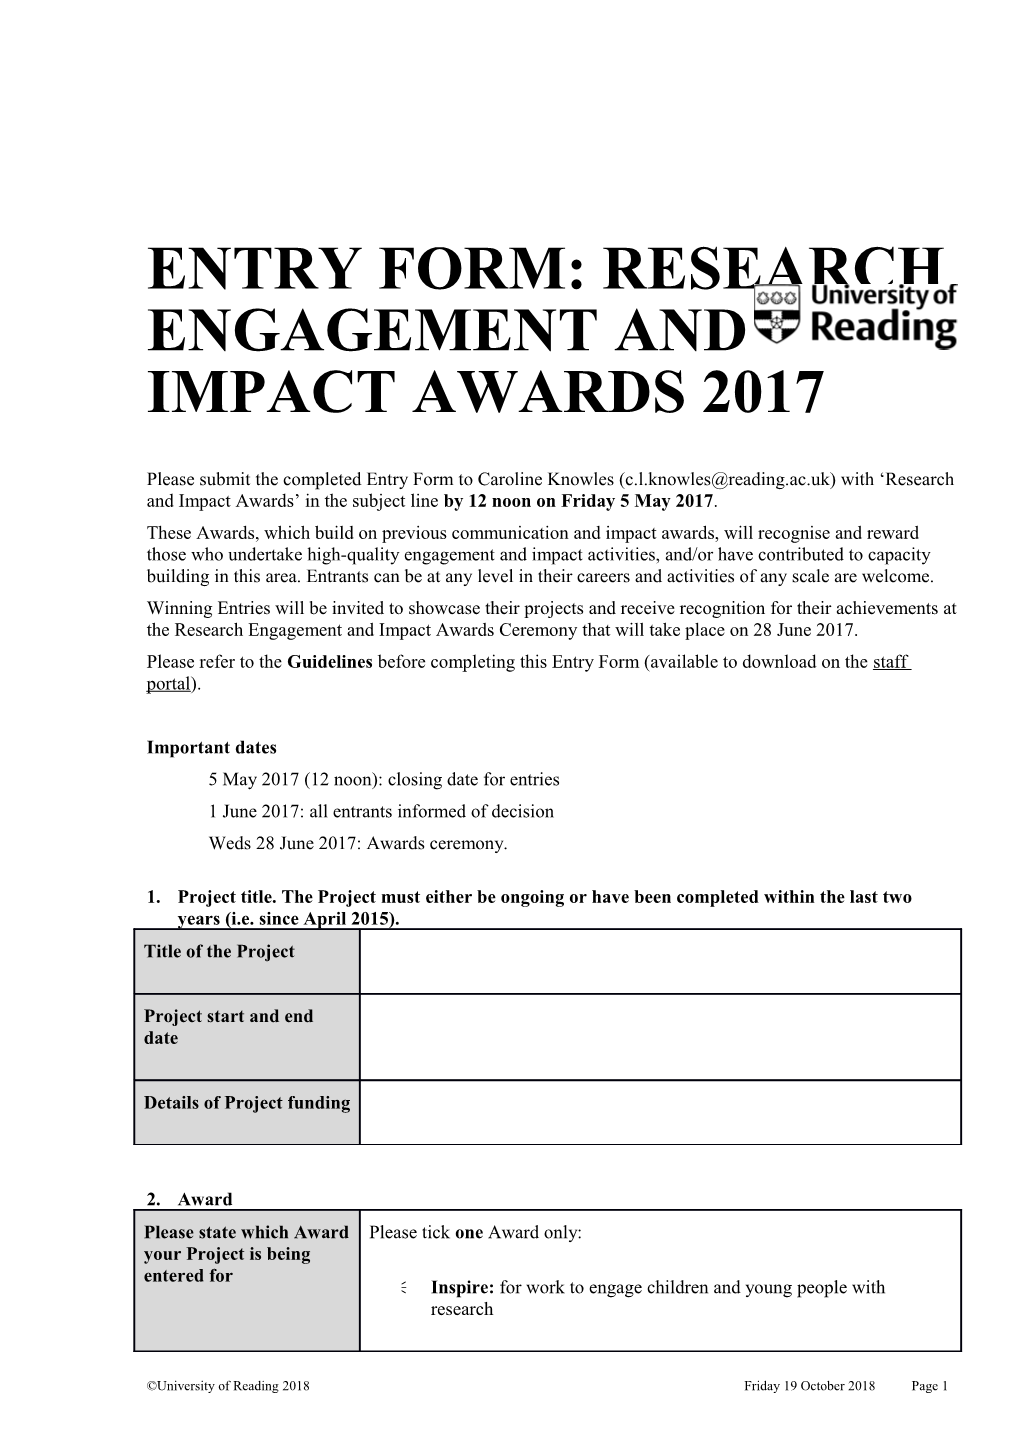 ENTRY FORM: Research Engagement and Impact Awards 2017